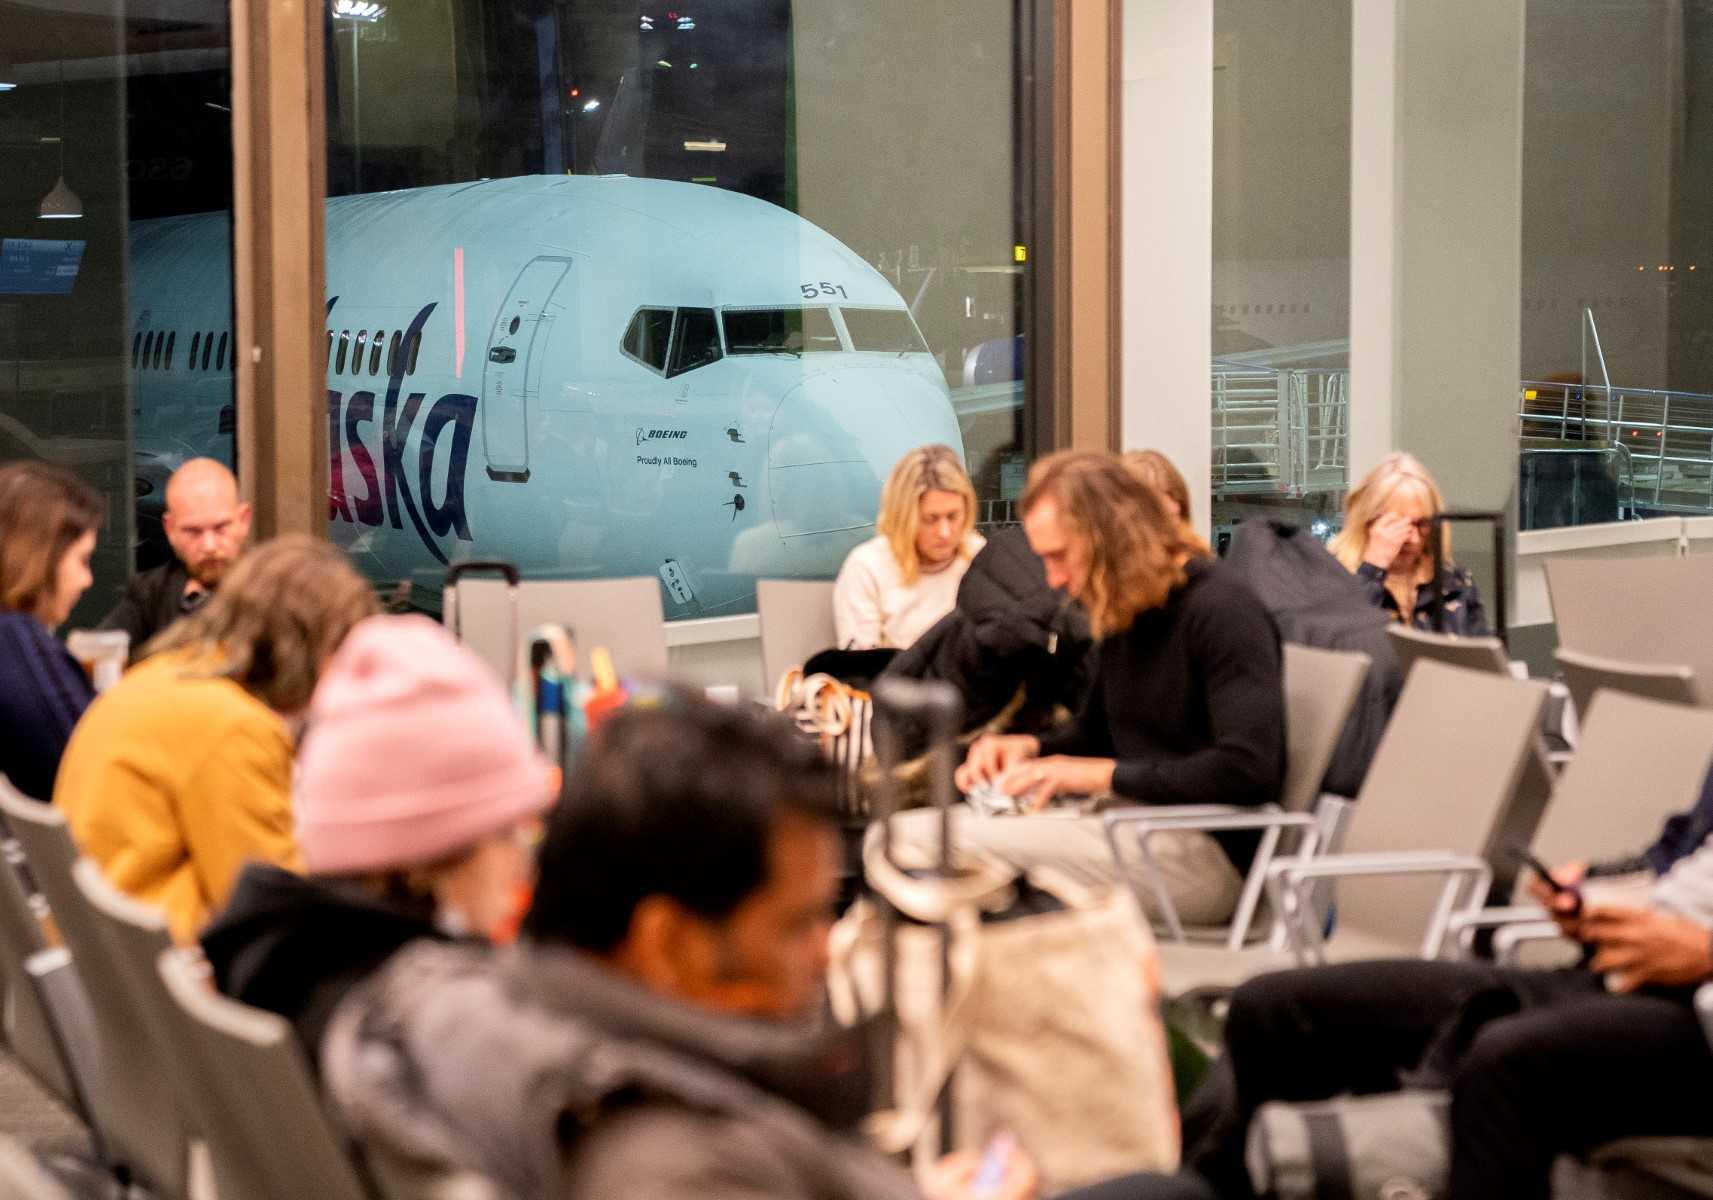 Travellers wait in the terminal as an Alaska Airlines plane sits at a gate at Los Angeles International Airport in Los Angeles, on Jan 11. Photo: AFP